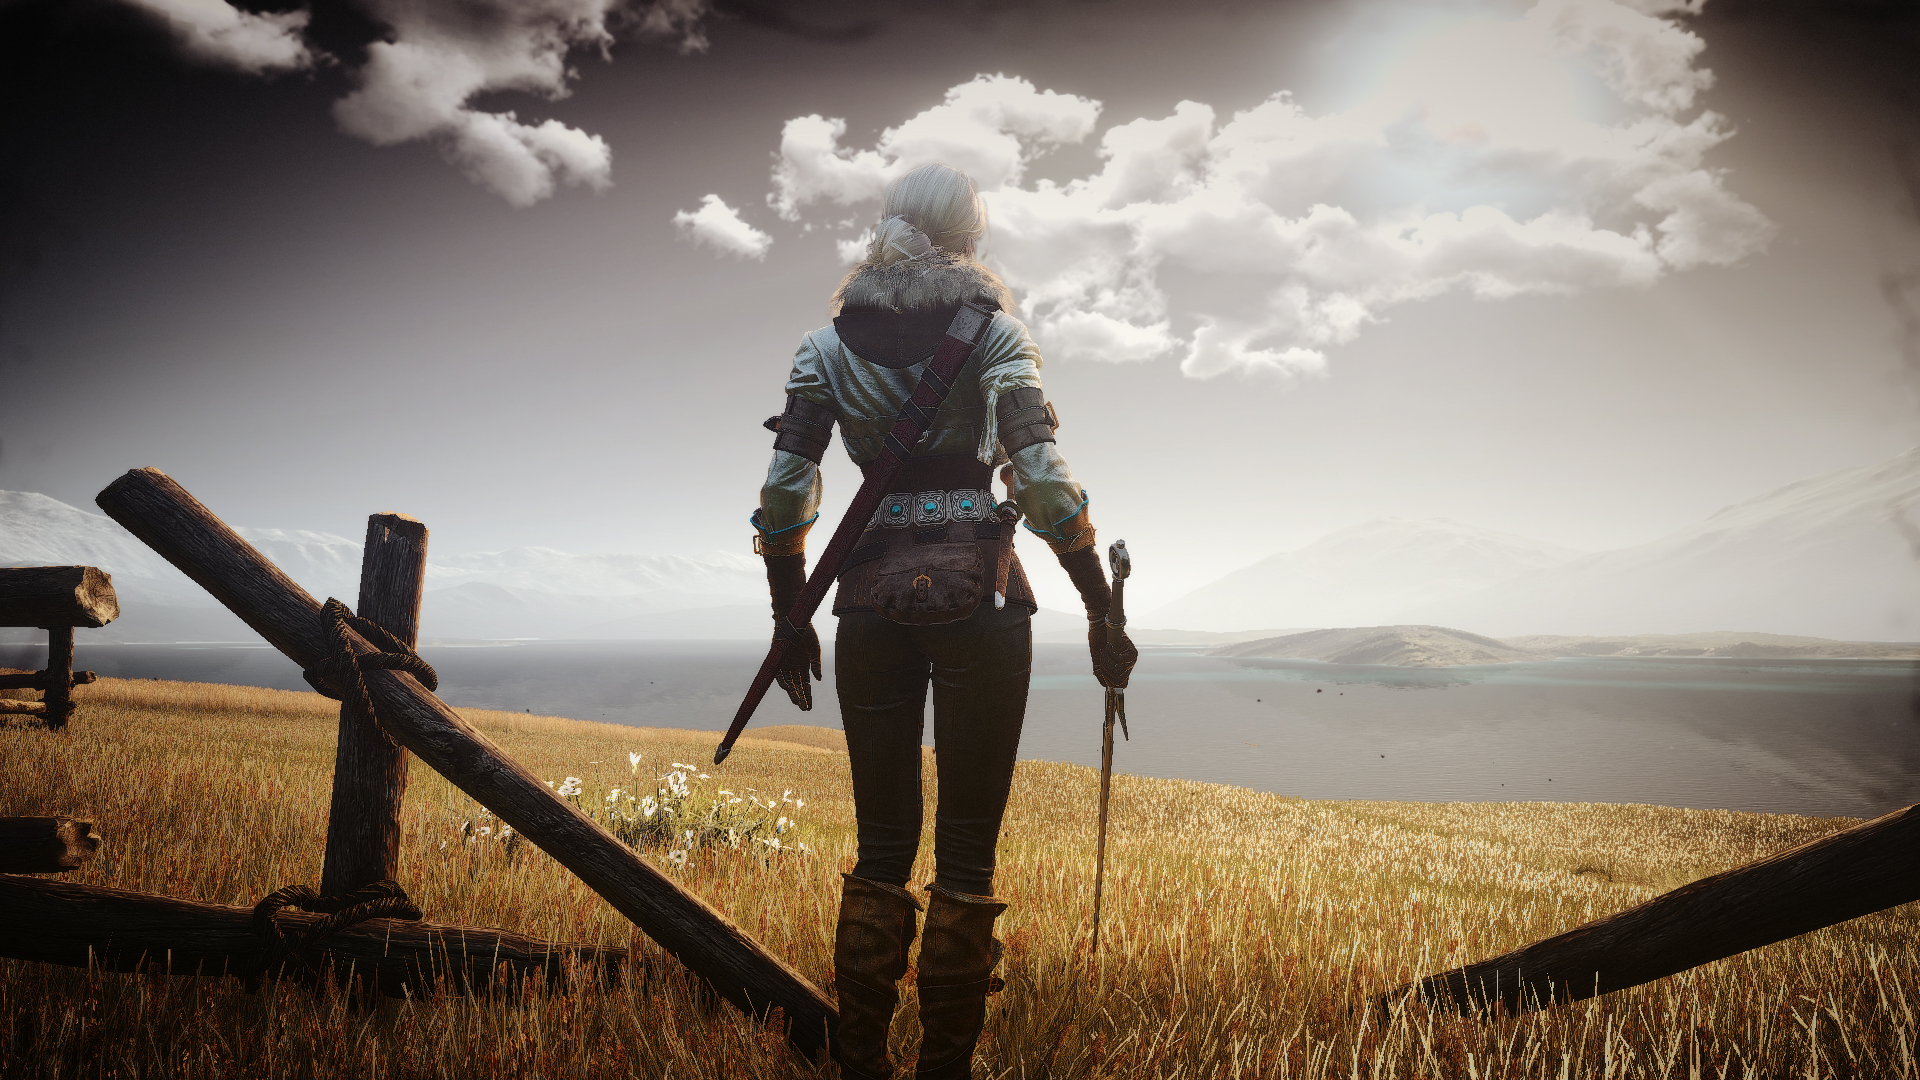 Wallpaper Ciri, landscape, the wicther, video game